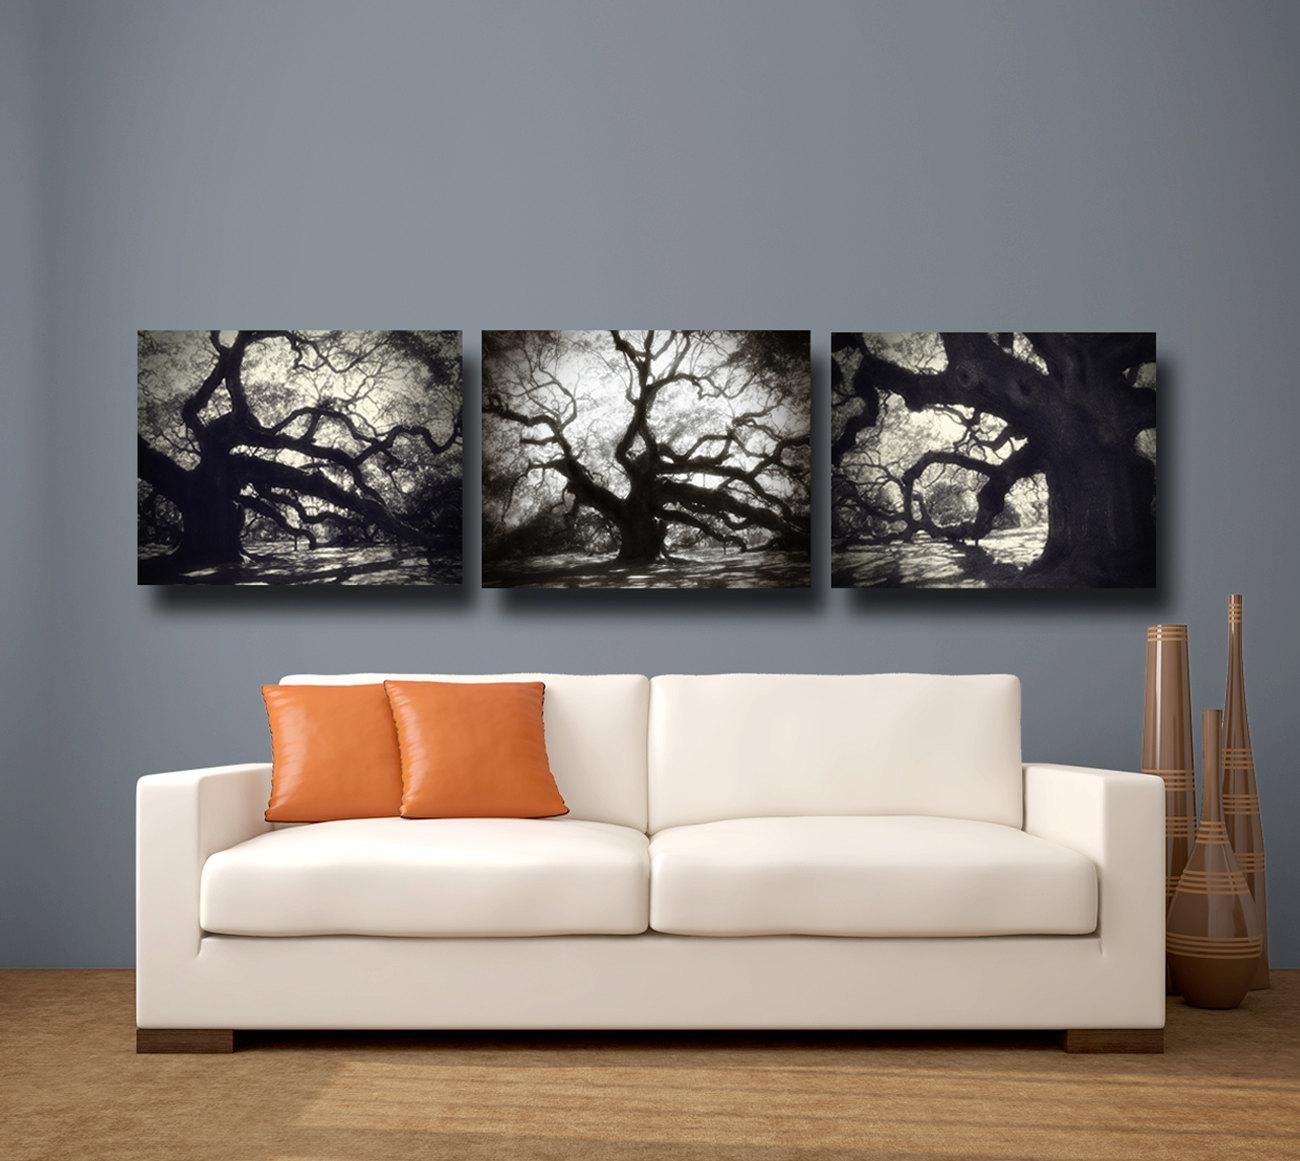 Big Wall Art. New 5 Piece Modern Home Decoration Wall Decor Art With Regard To Contemporary Oversized Wall Art (Photo 16 of 20)